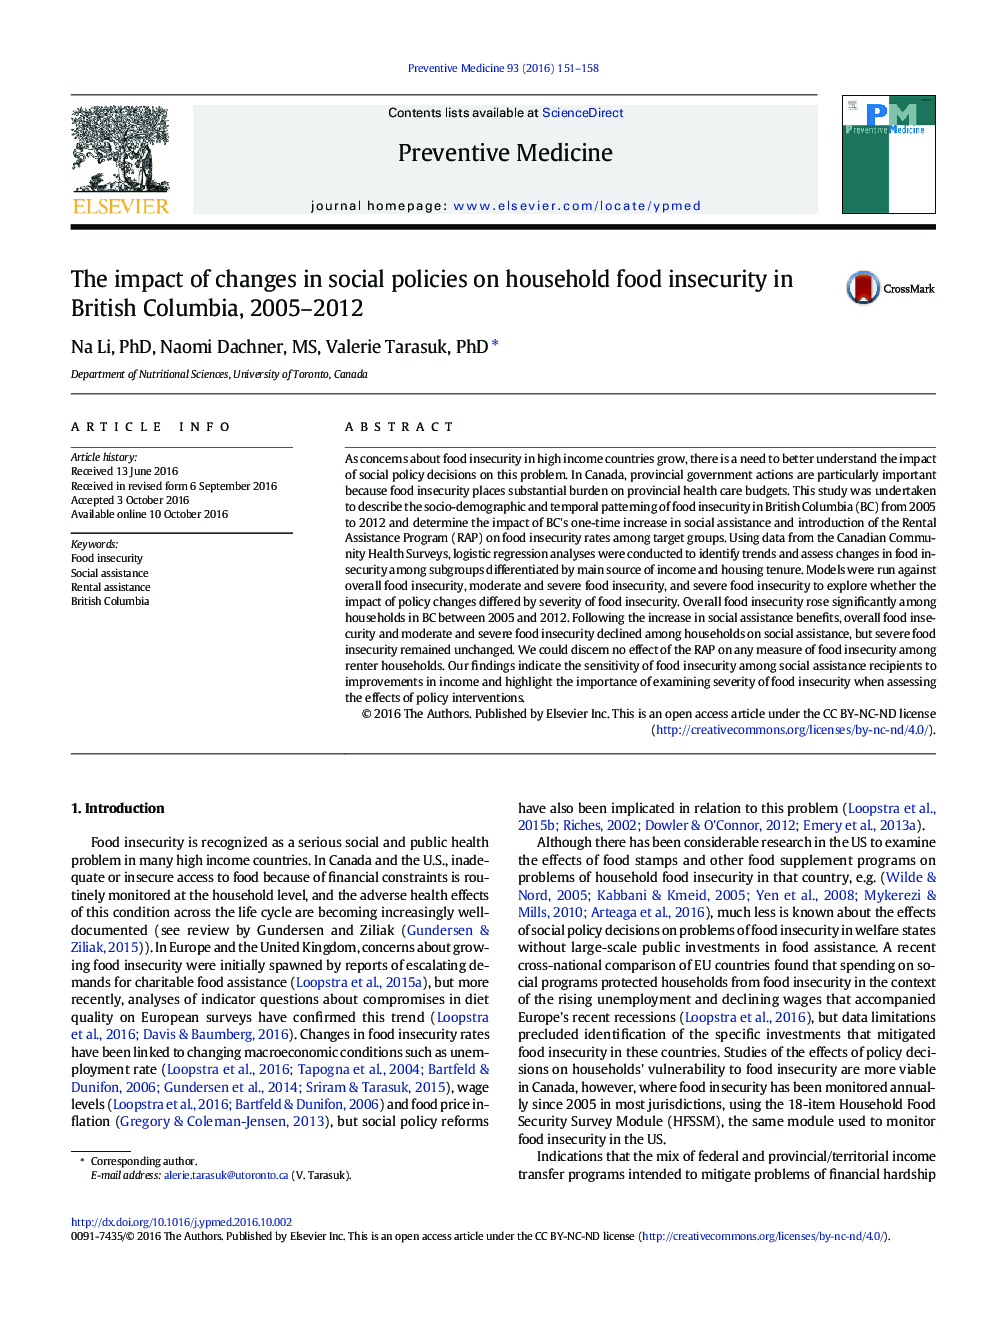 The impact of changes in social policies on household food insecurity in British Columbia, 2005-2012